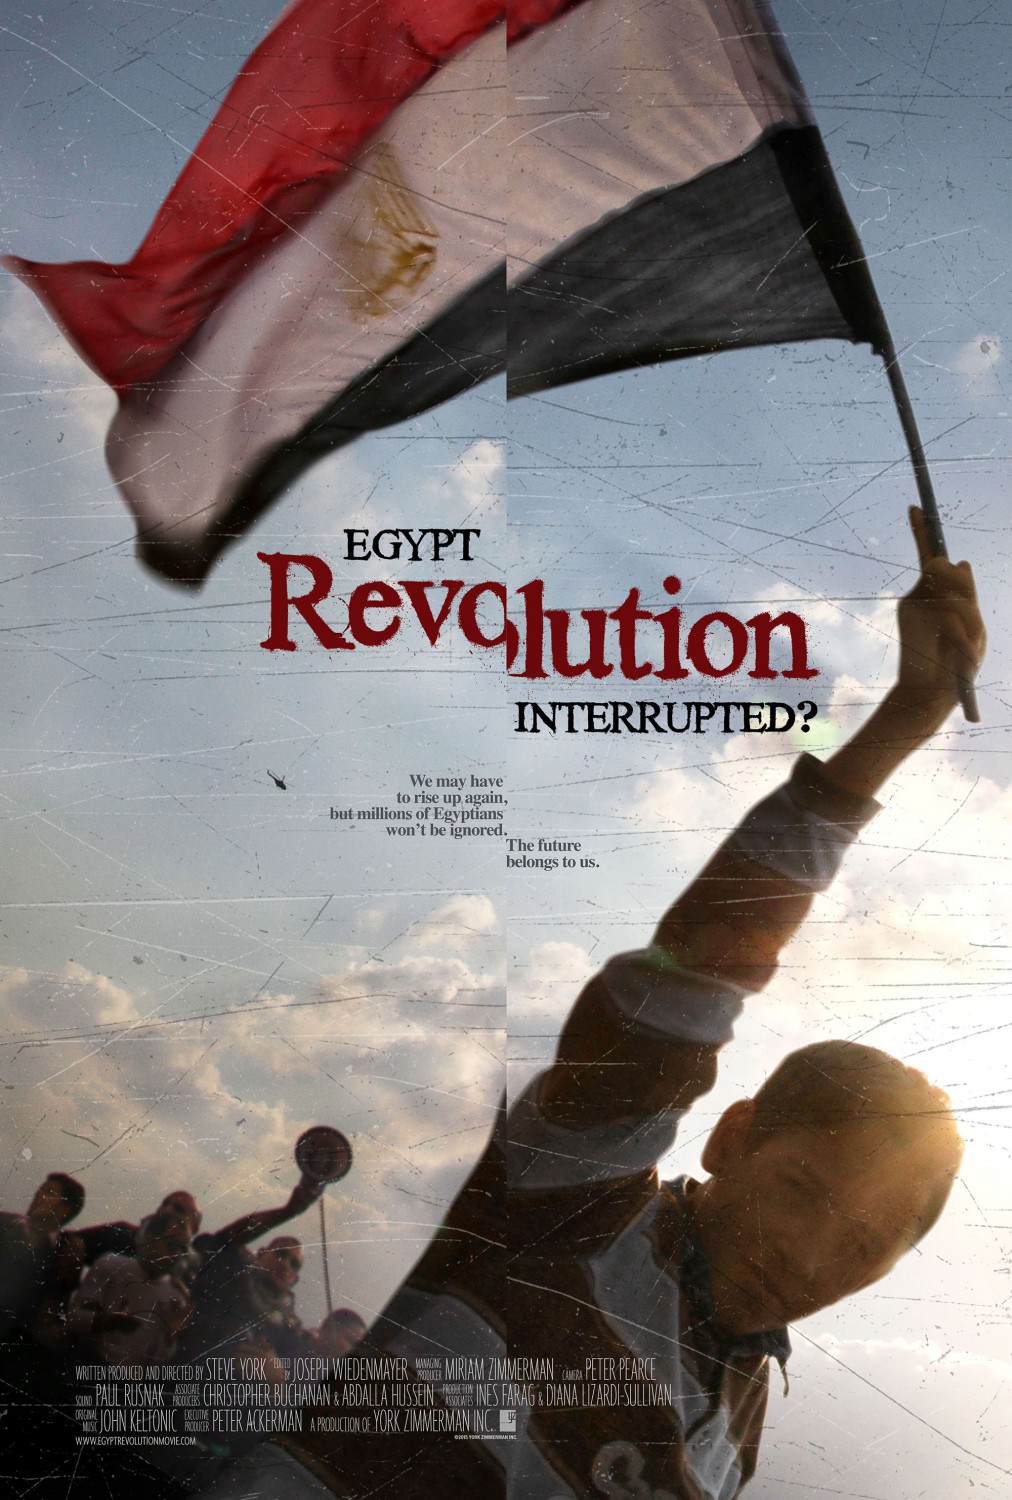 Extra Large Movie Poster Image for Egypt: Revolution Interrupted? 